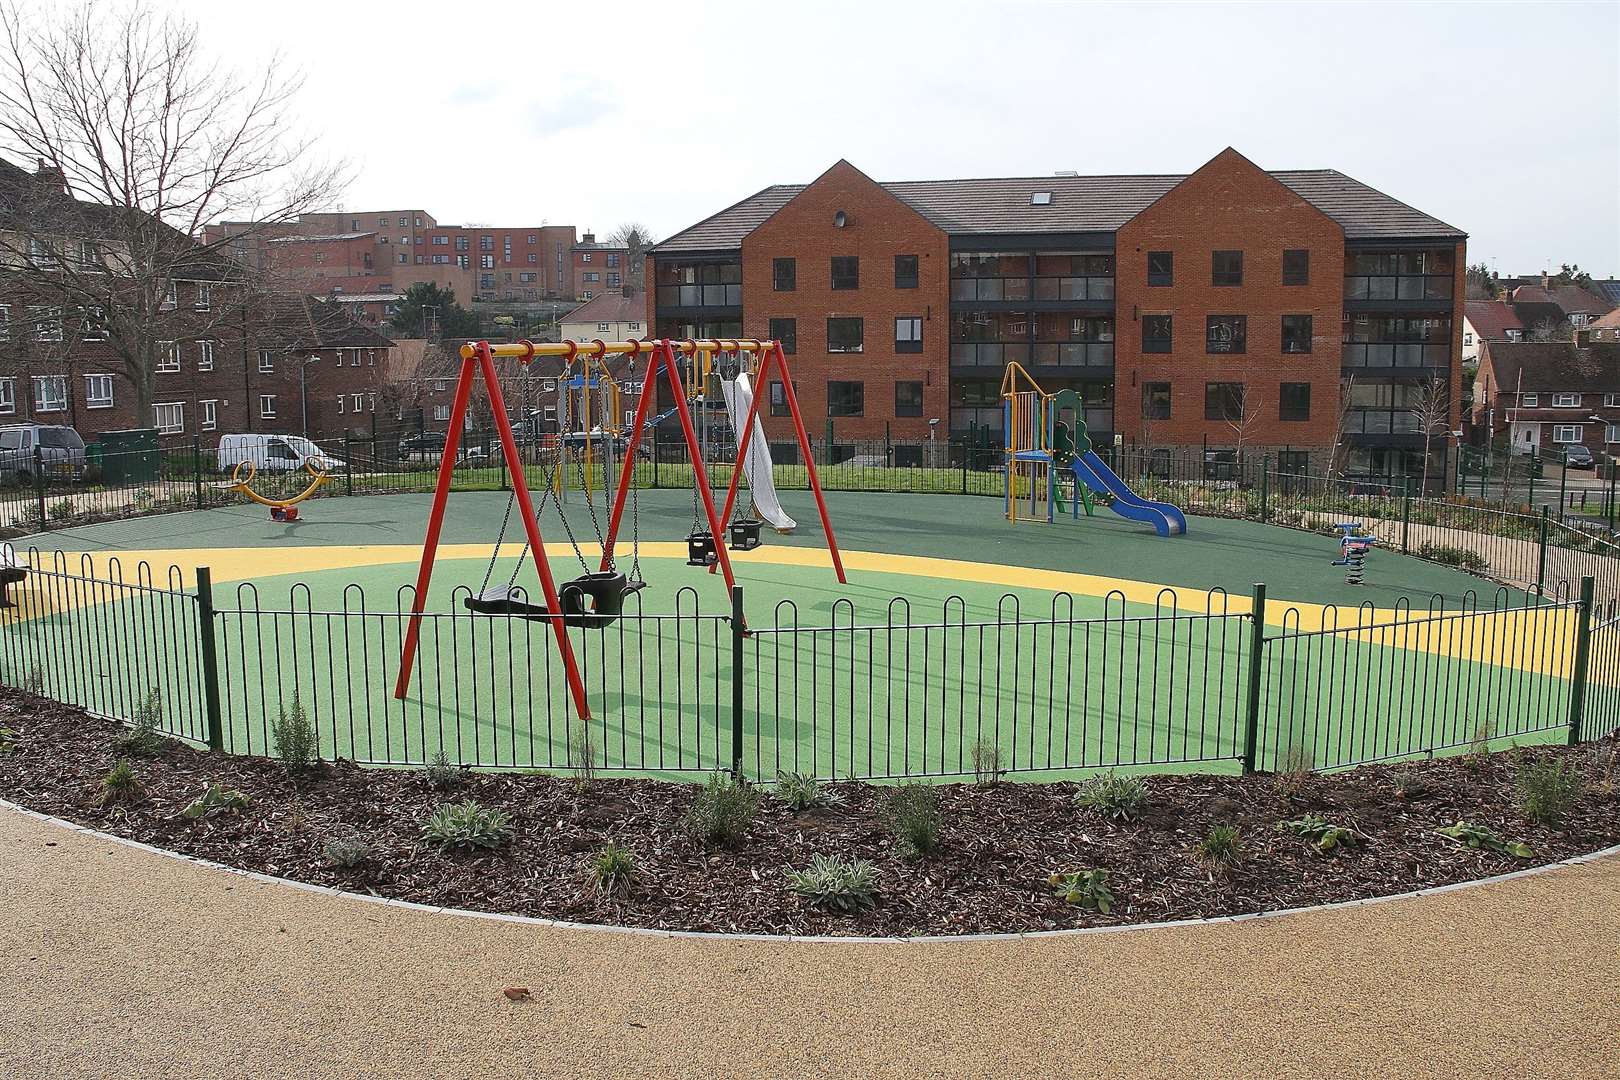 Bishop’s Court at St Patrick’s Gardens, Gravesend, has a play area. Picture: Gravesham Borough Council